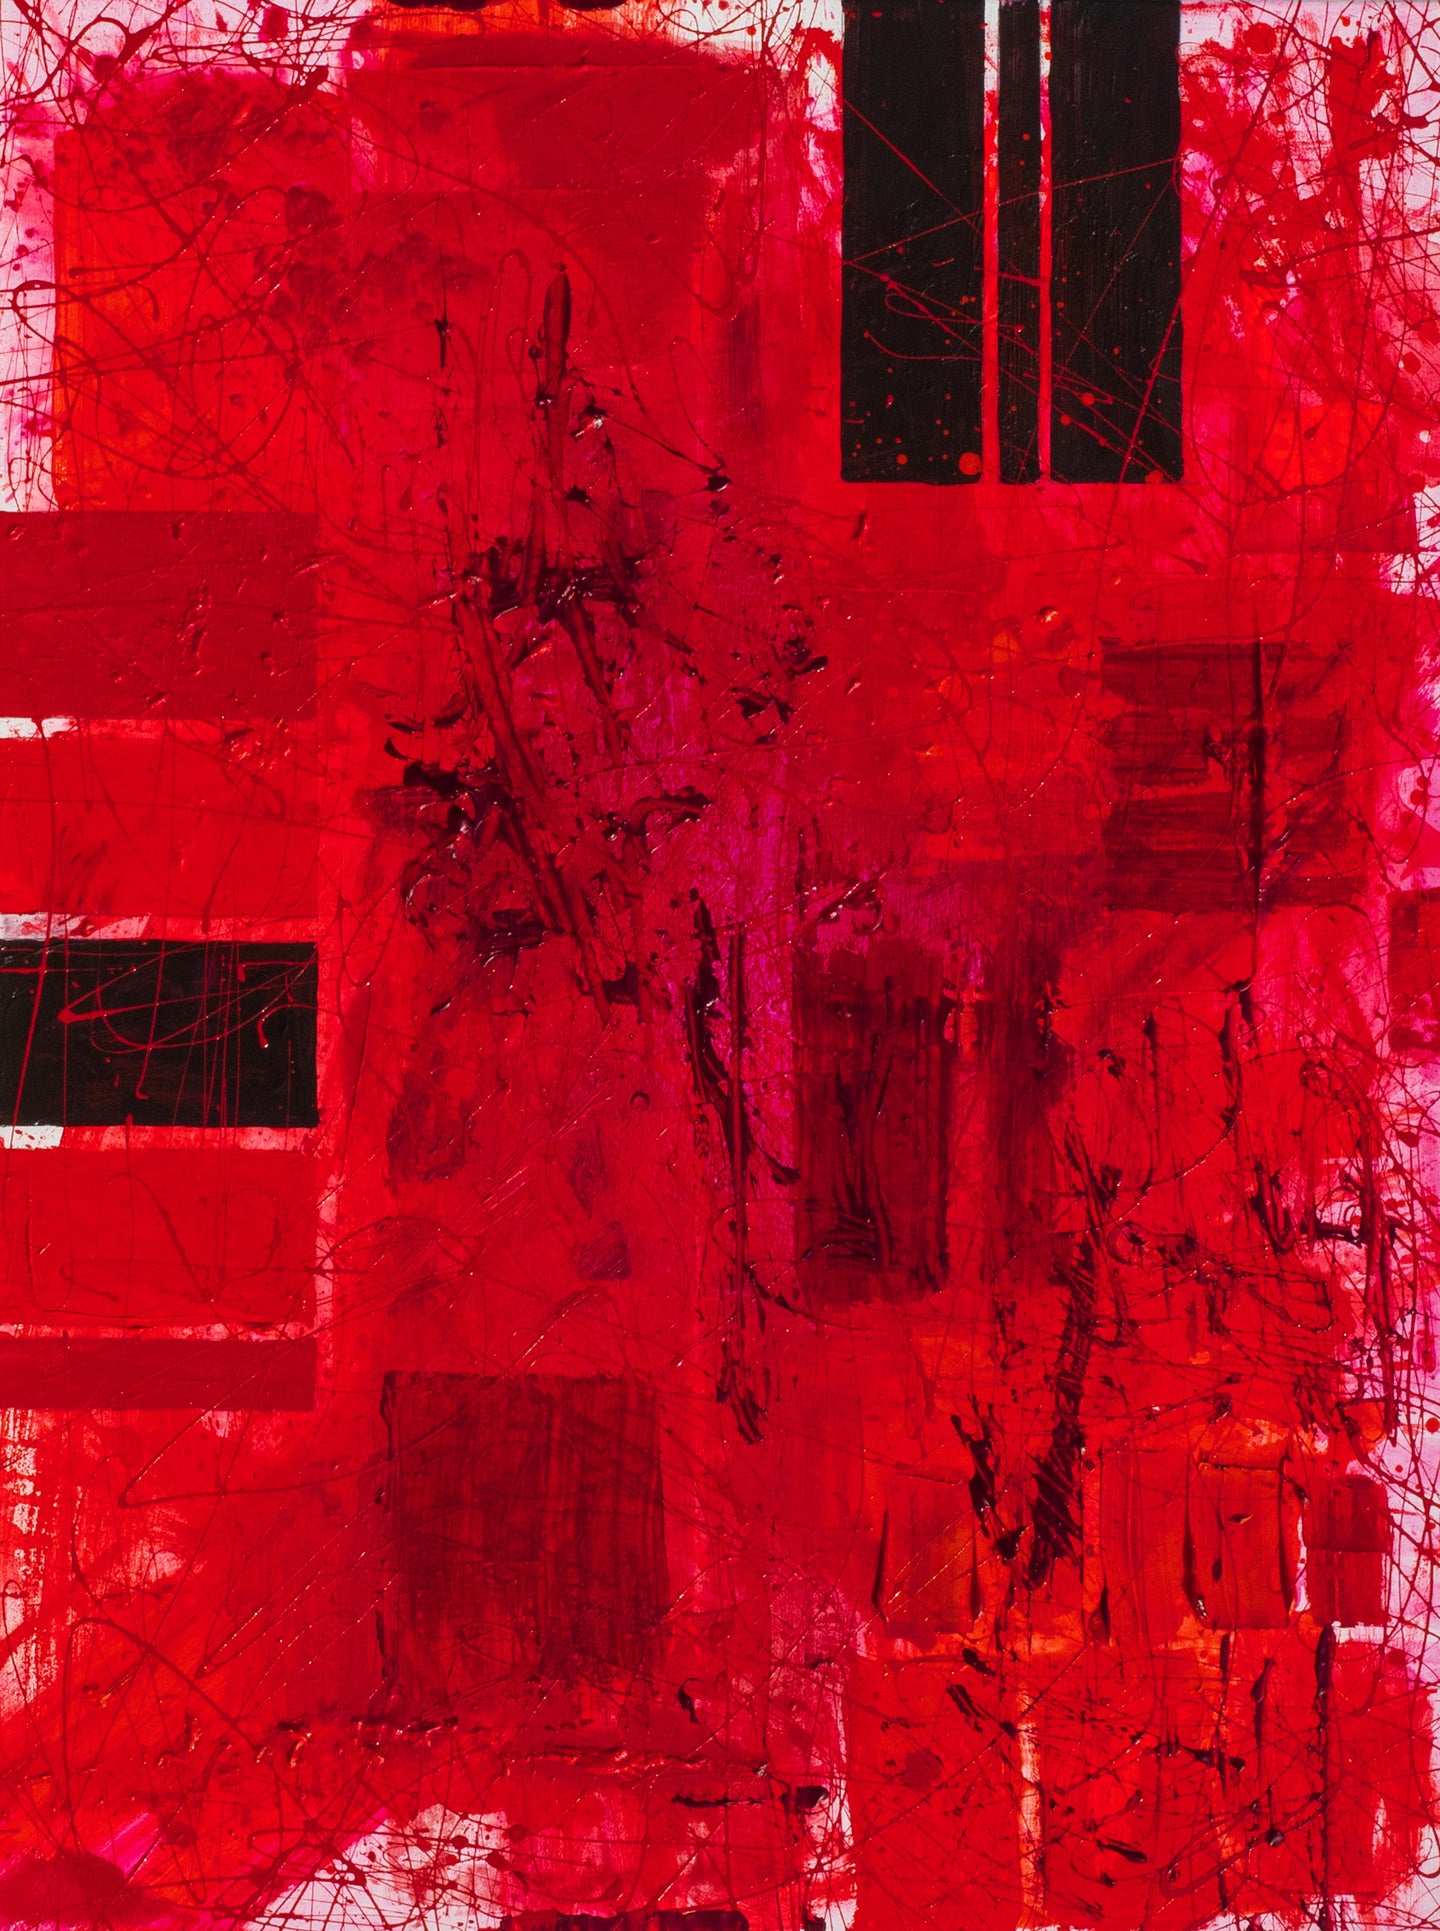 J. Steven Manolis, REDWORLD, 2019.02, acrylic and latex enamel on canvas, 48 x 36 inches, Red and Black Abstract, Abstract expressionism art for sale at Manolis Projects Art Gallery, Miami, Fl